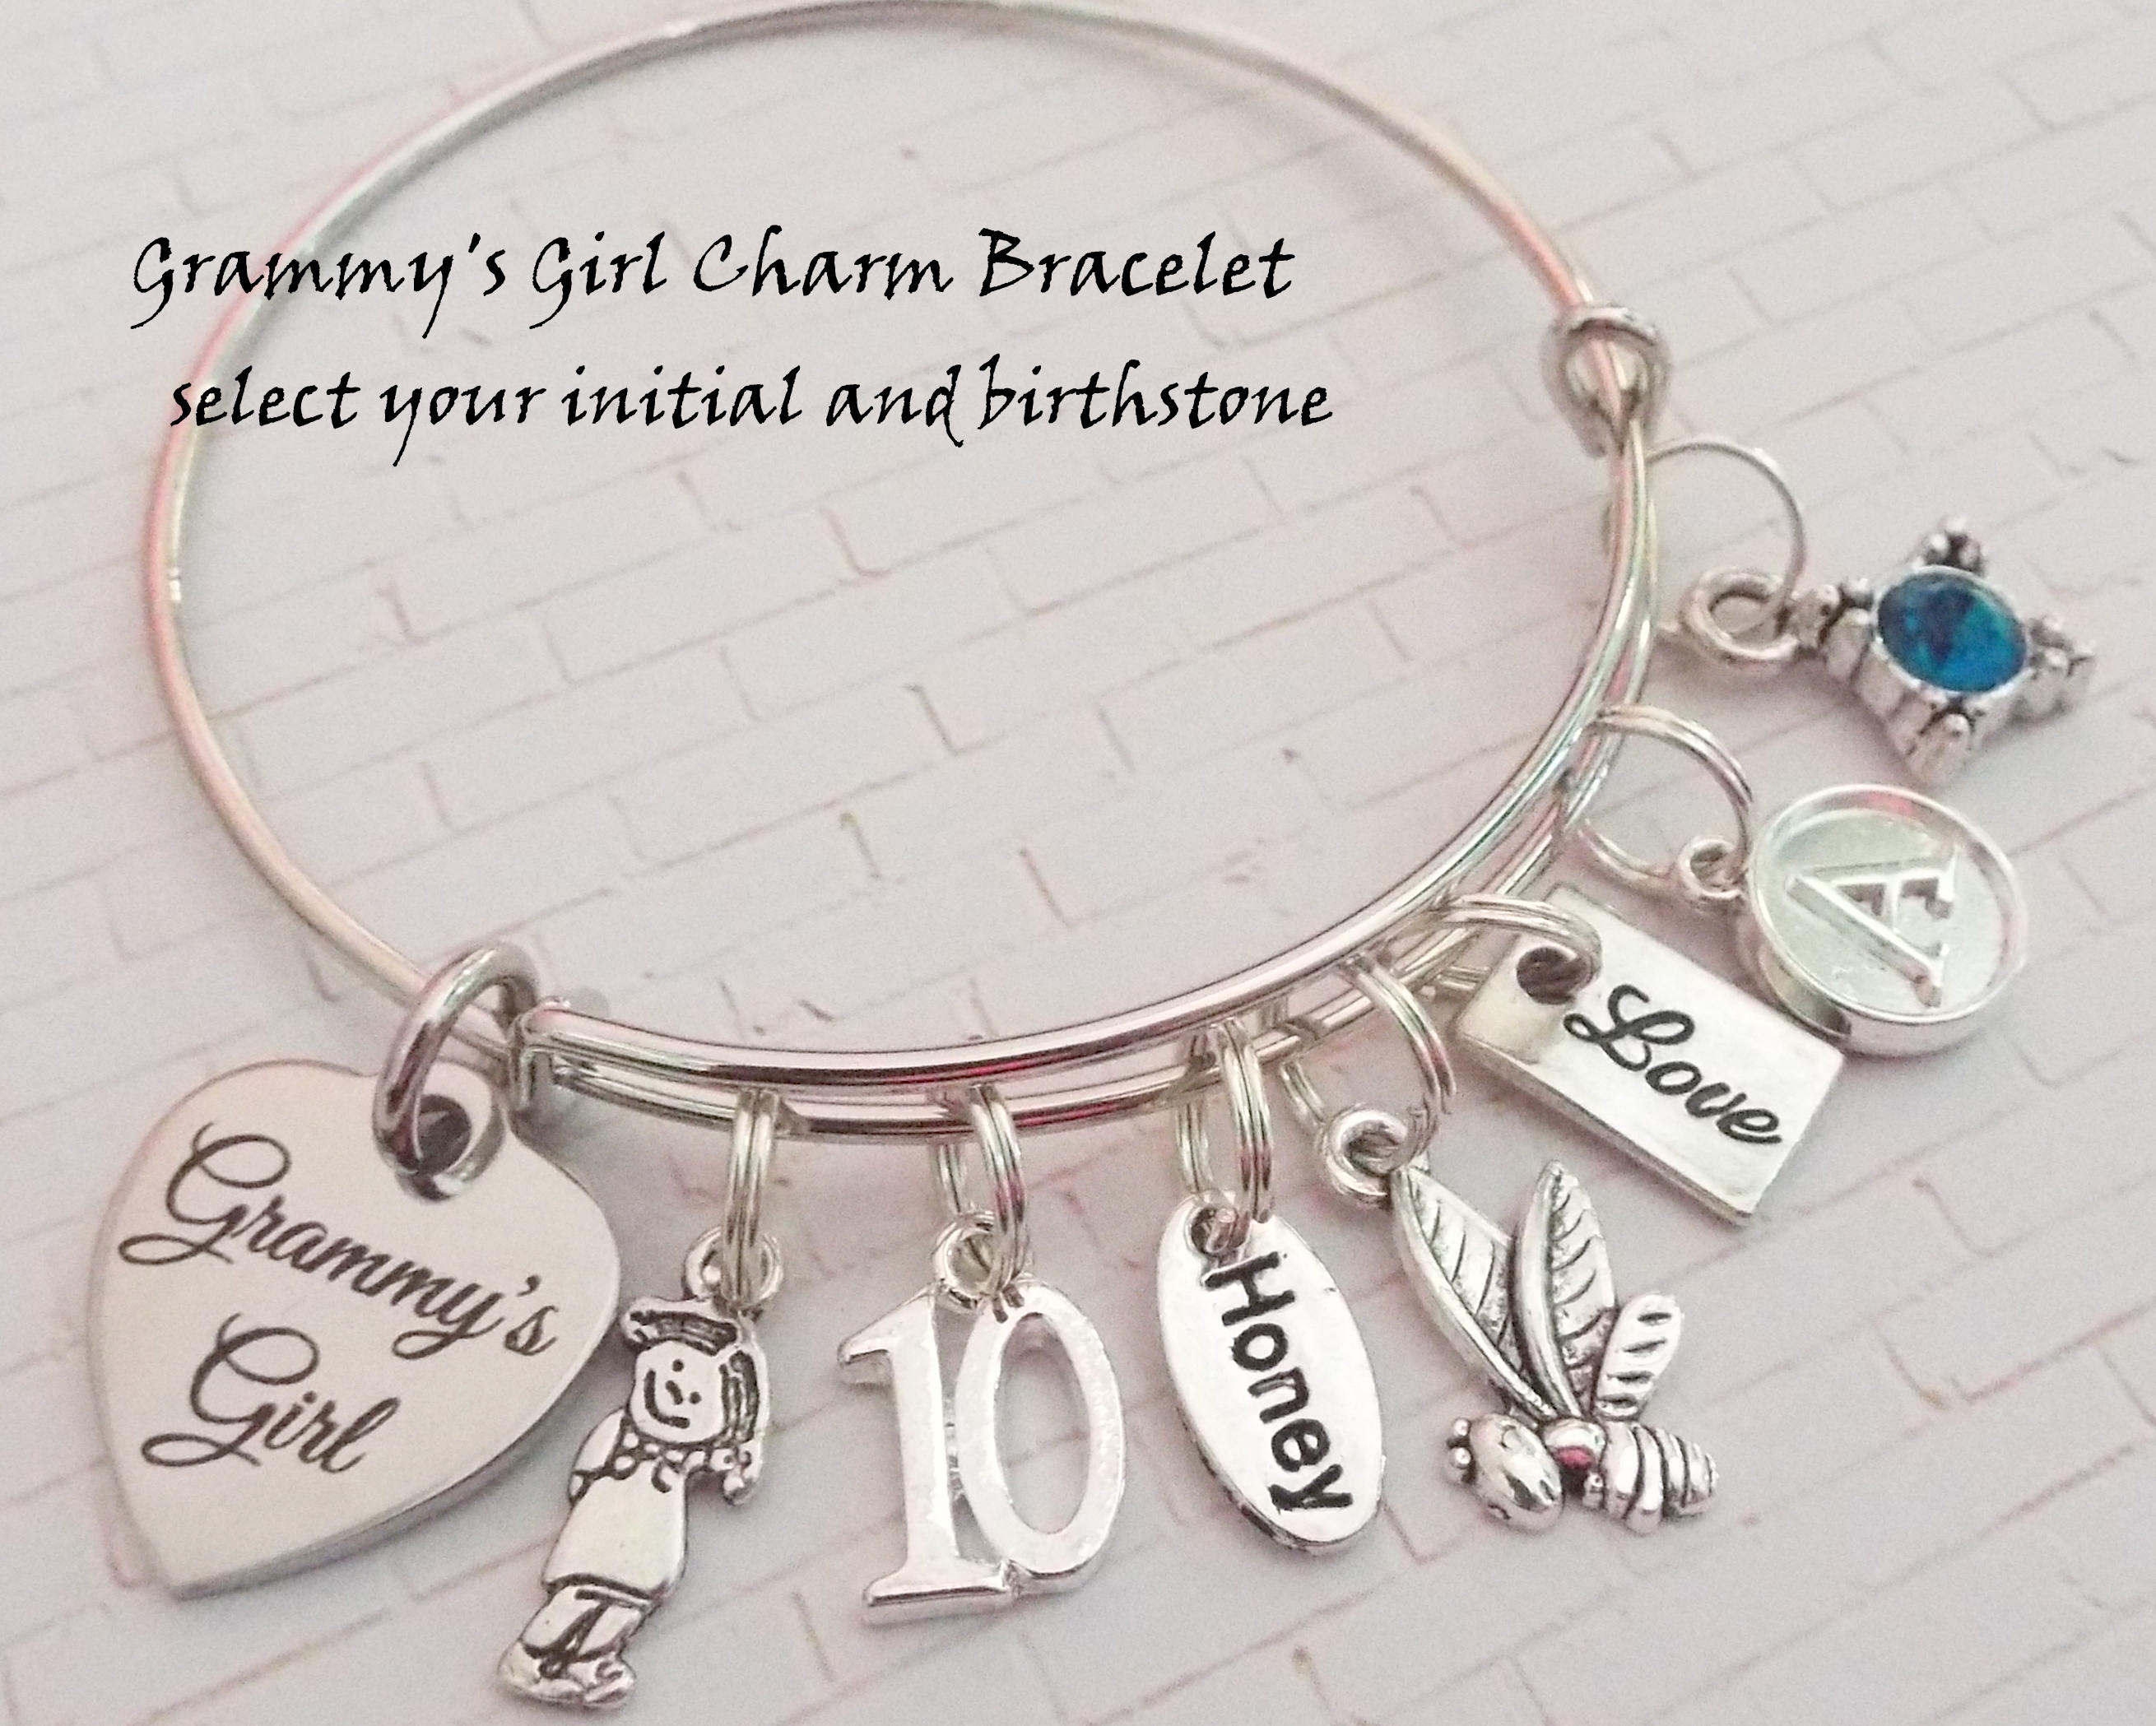 ESSIE ODILA Gifts for Birthday Girl Sweet 10th 11th 12th Birthday Bracelet for Women Teenager Girls 925 Sterling Silver Crystal Beads 7th-25th Birthday Jewelry Gift for Daughter Sister Niece